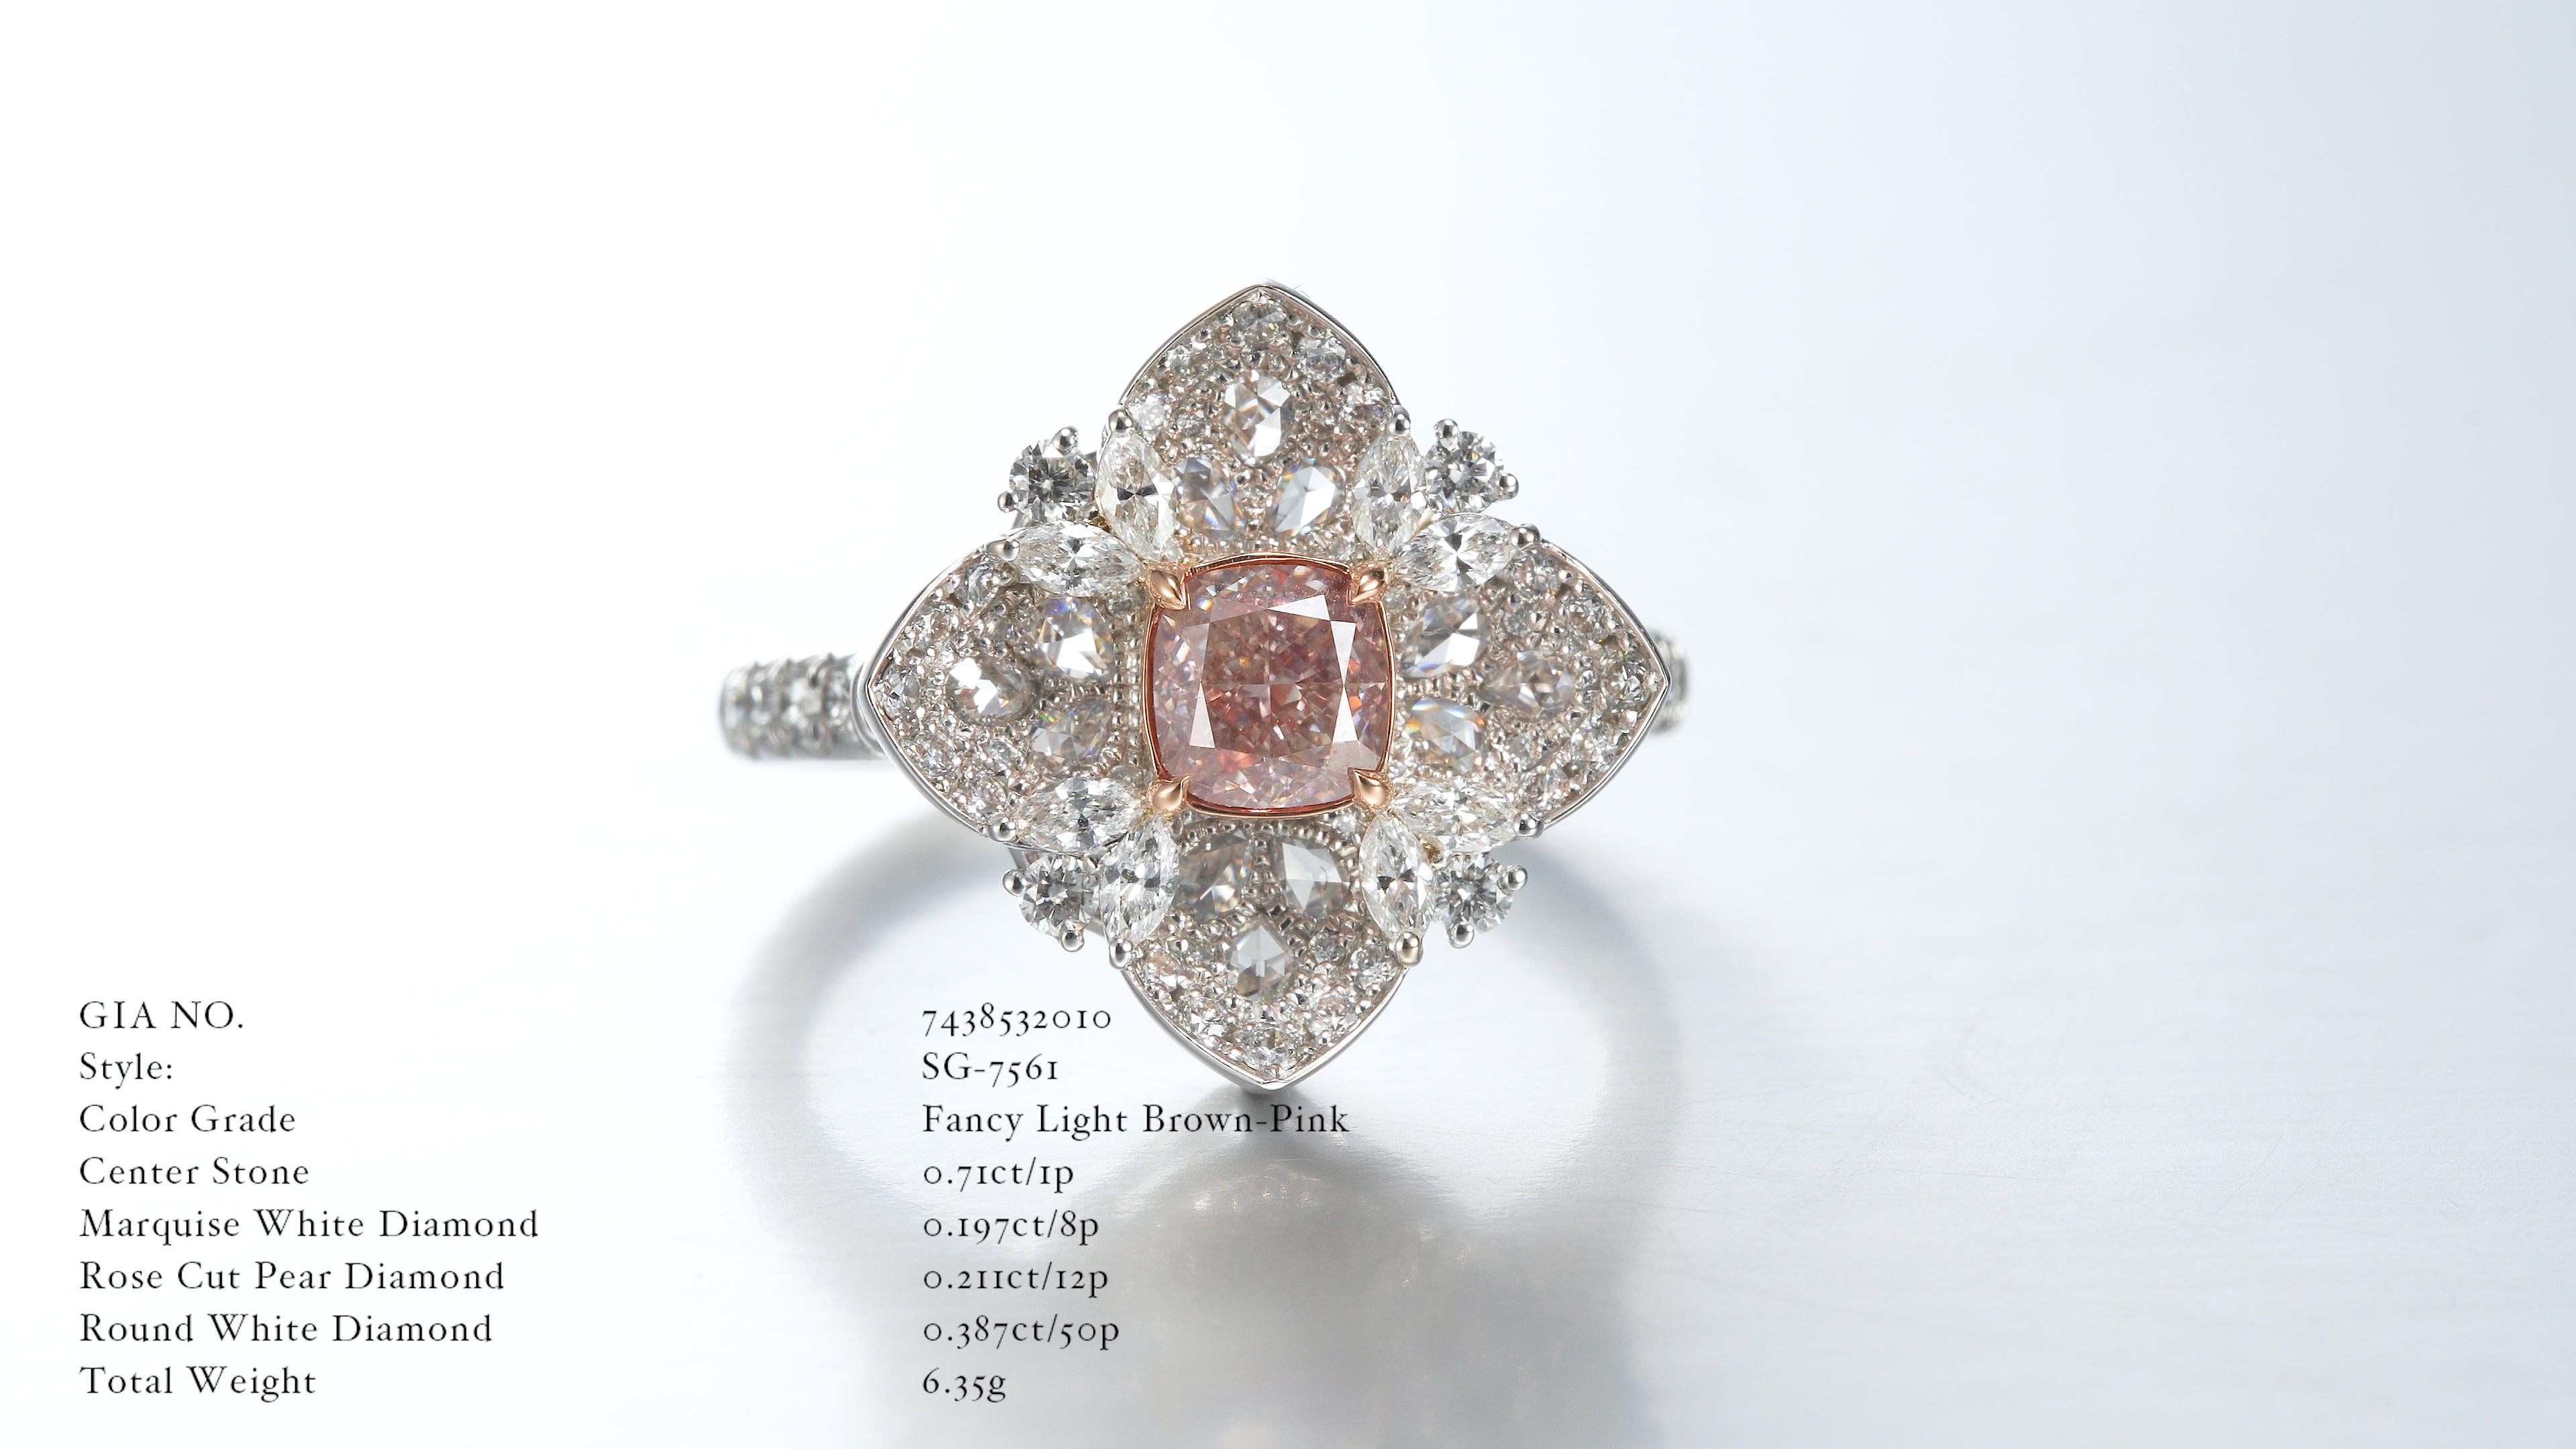 Introducing a singular masterpiece that epitomizes elegance and rare beauty, our GIA Certified 0.70ct Natural Fancy Light Brown-Pink Cushion Shape Diamond takes center stage in this extraordinary creation. This unique gem, certified by the renowned